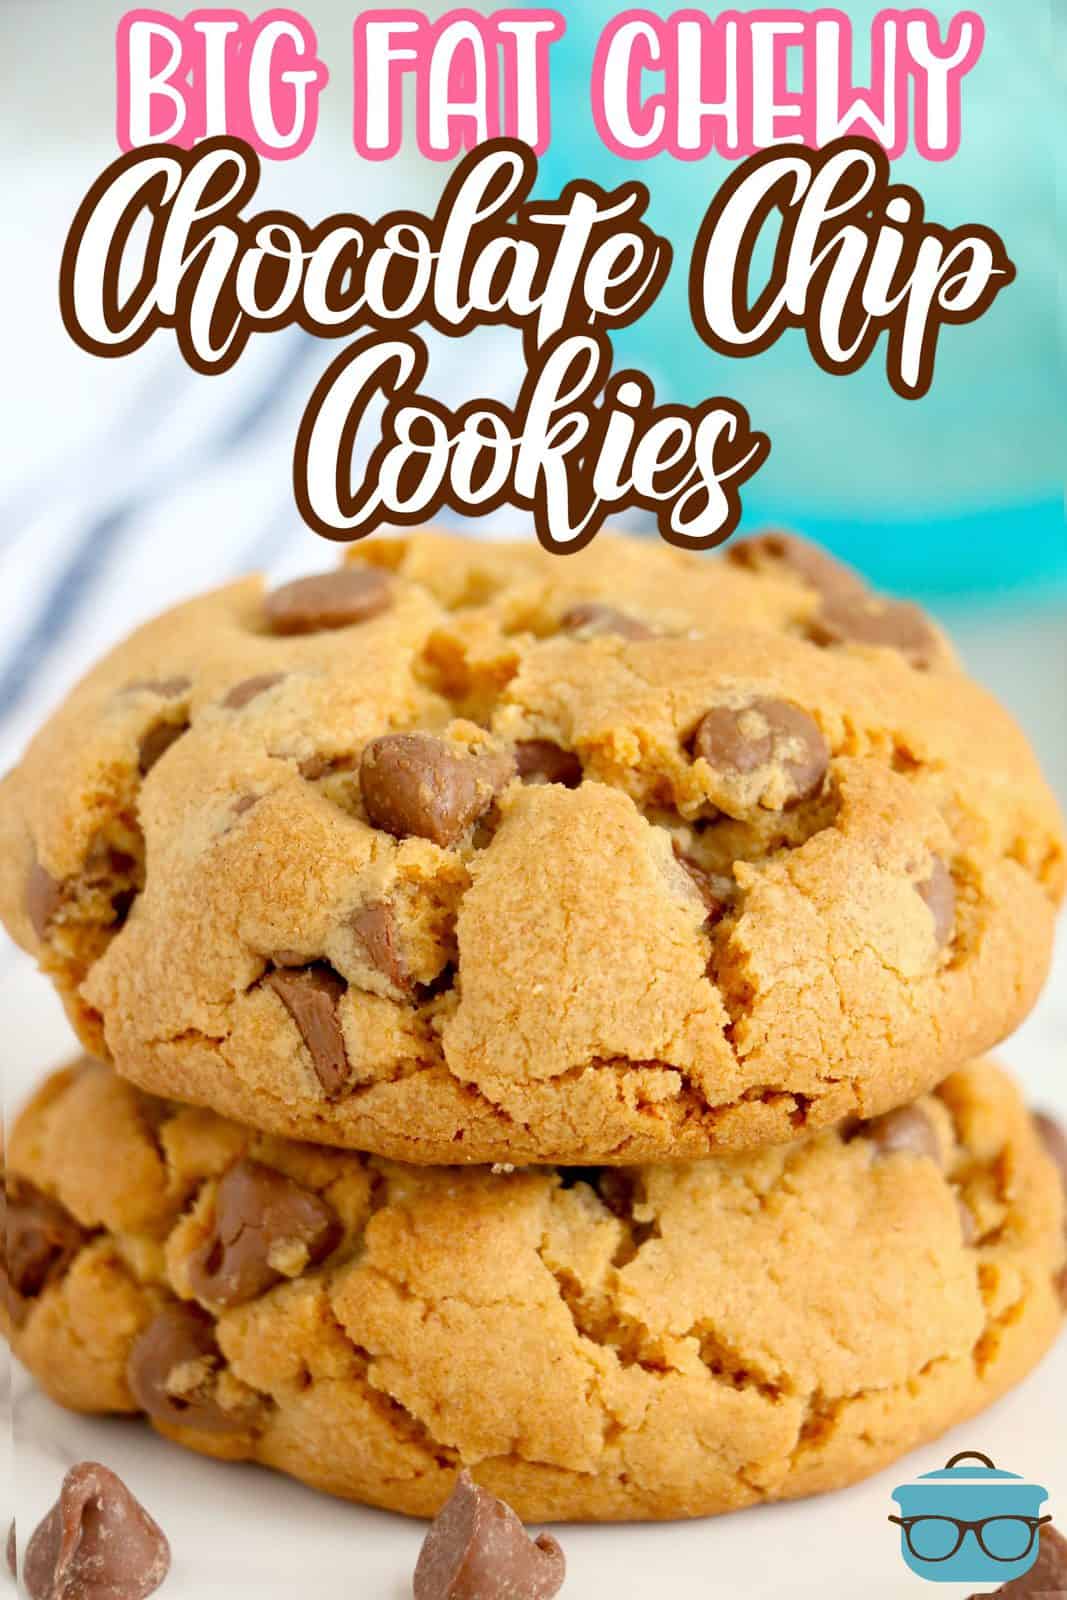 Pinterest image of Big, Fat, Chewy Chocolate Chip Cookies stacked on top of one another.